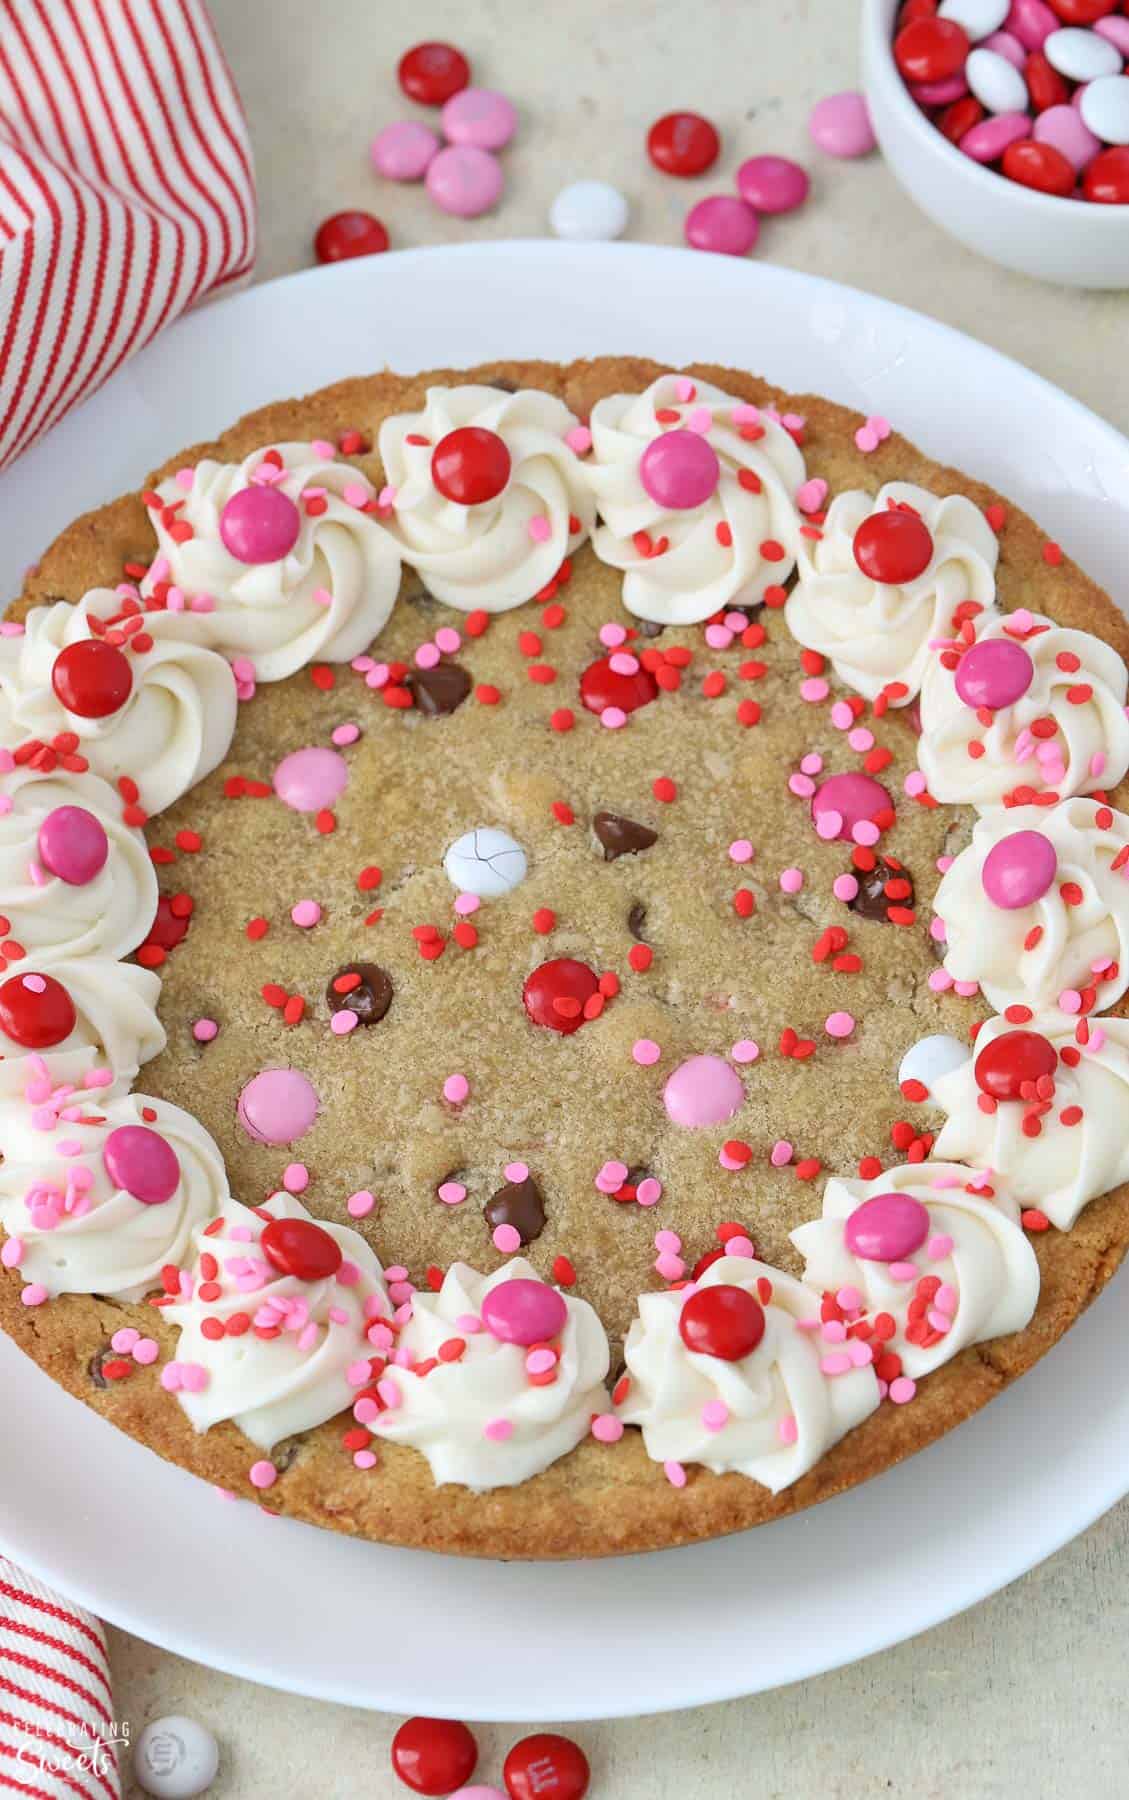 Cookie cake topped with frosting and red and pink M&M's